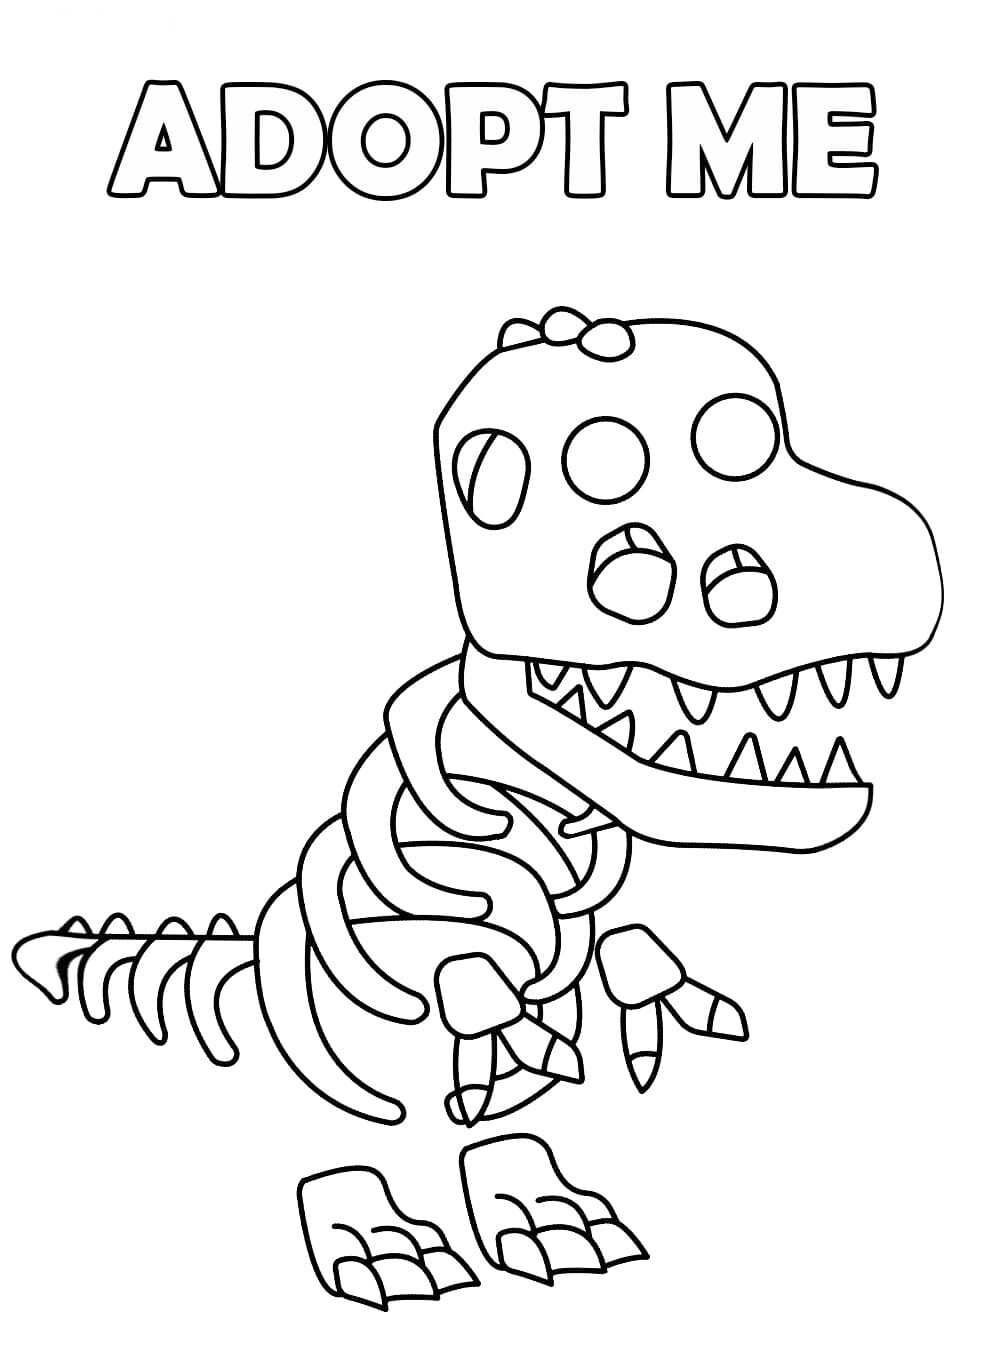 Bony figure of Skele-Rex from Adopt me Coloring Pages